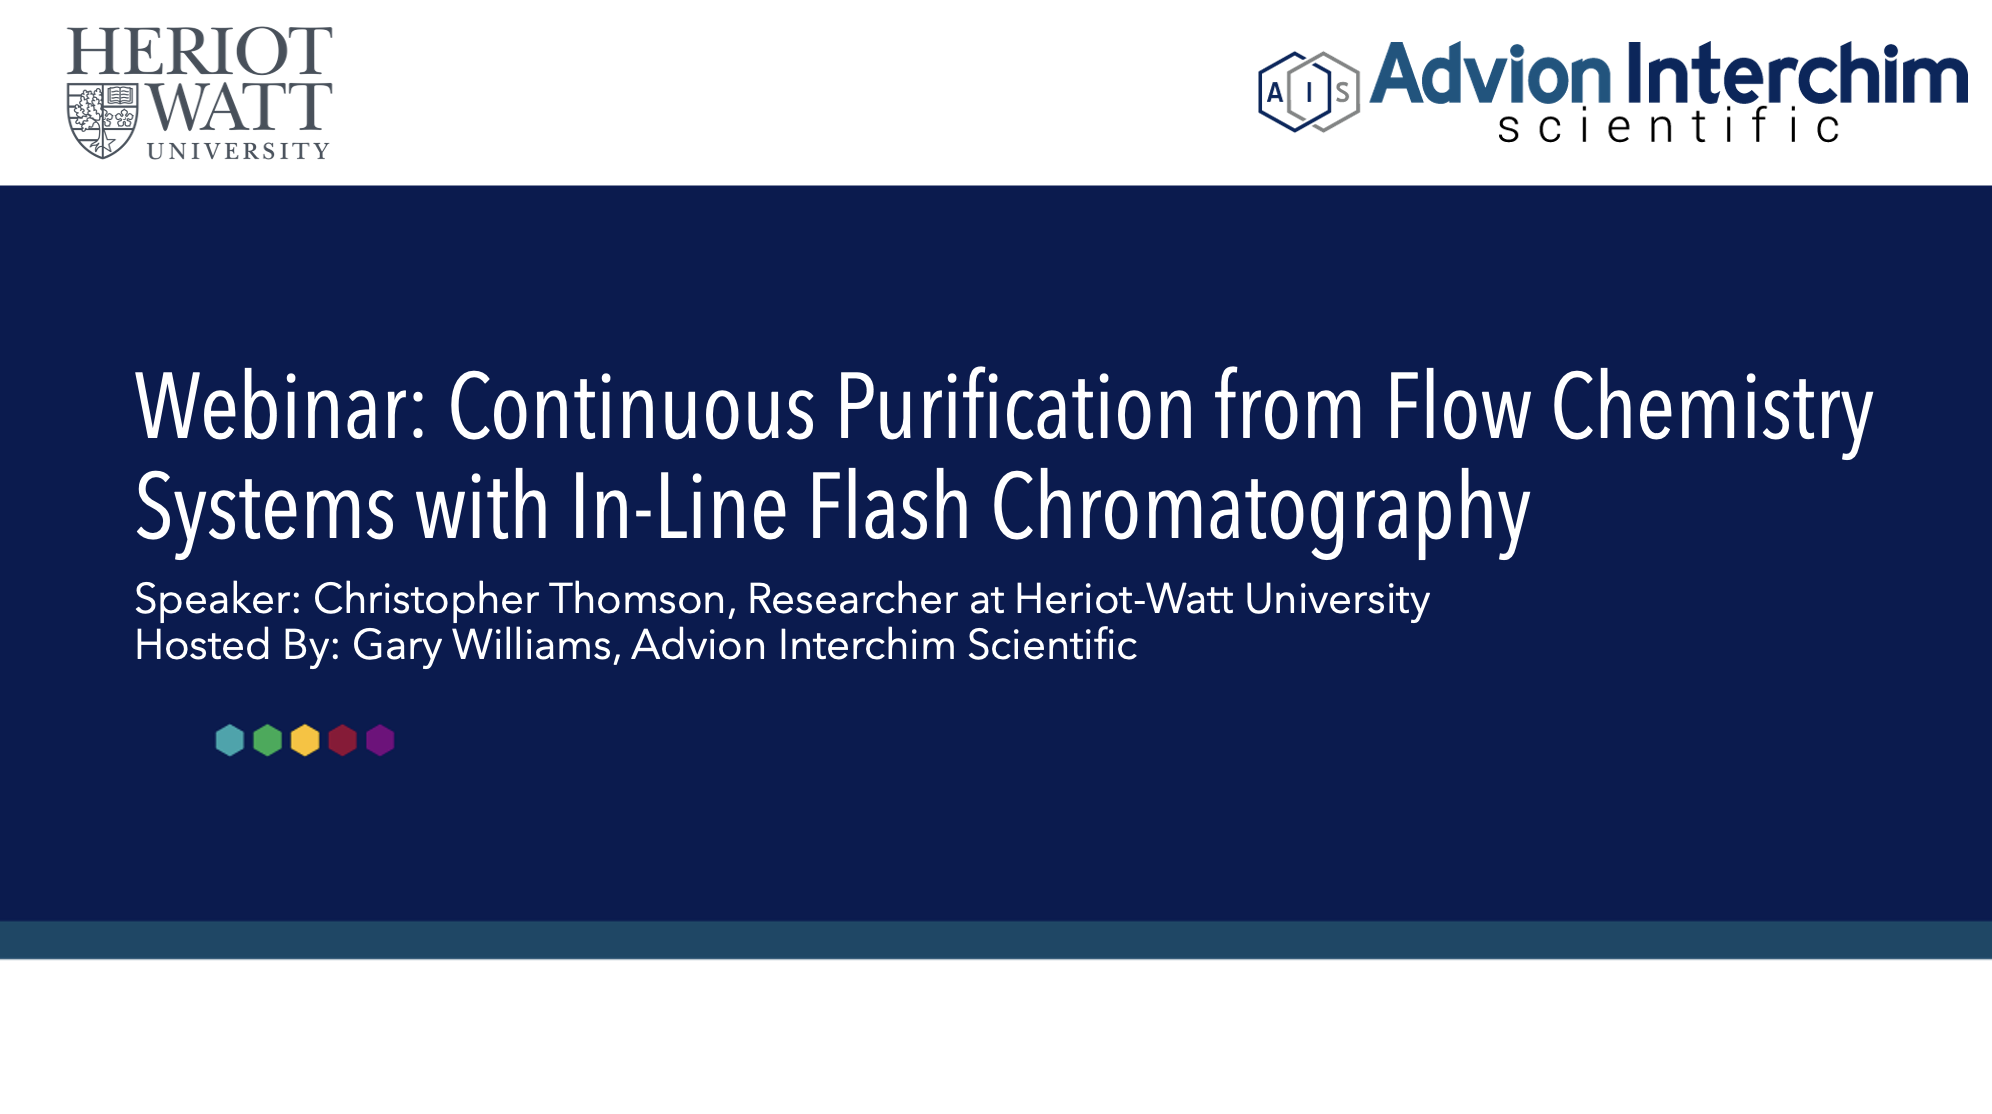 Continuous Purification from Flow Chemistry Systems with In-Line Flash Chromatography